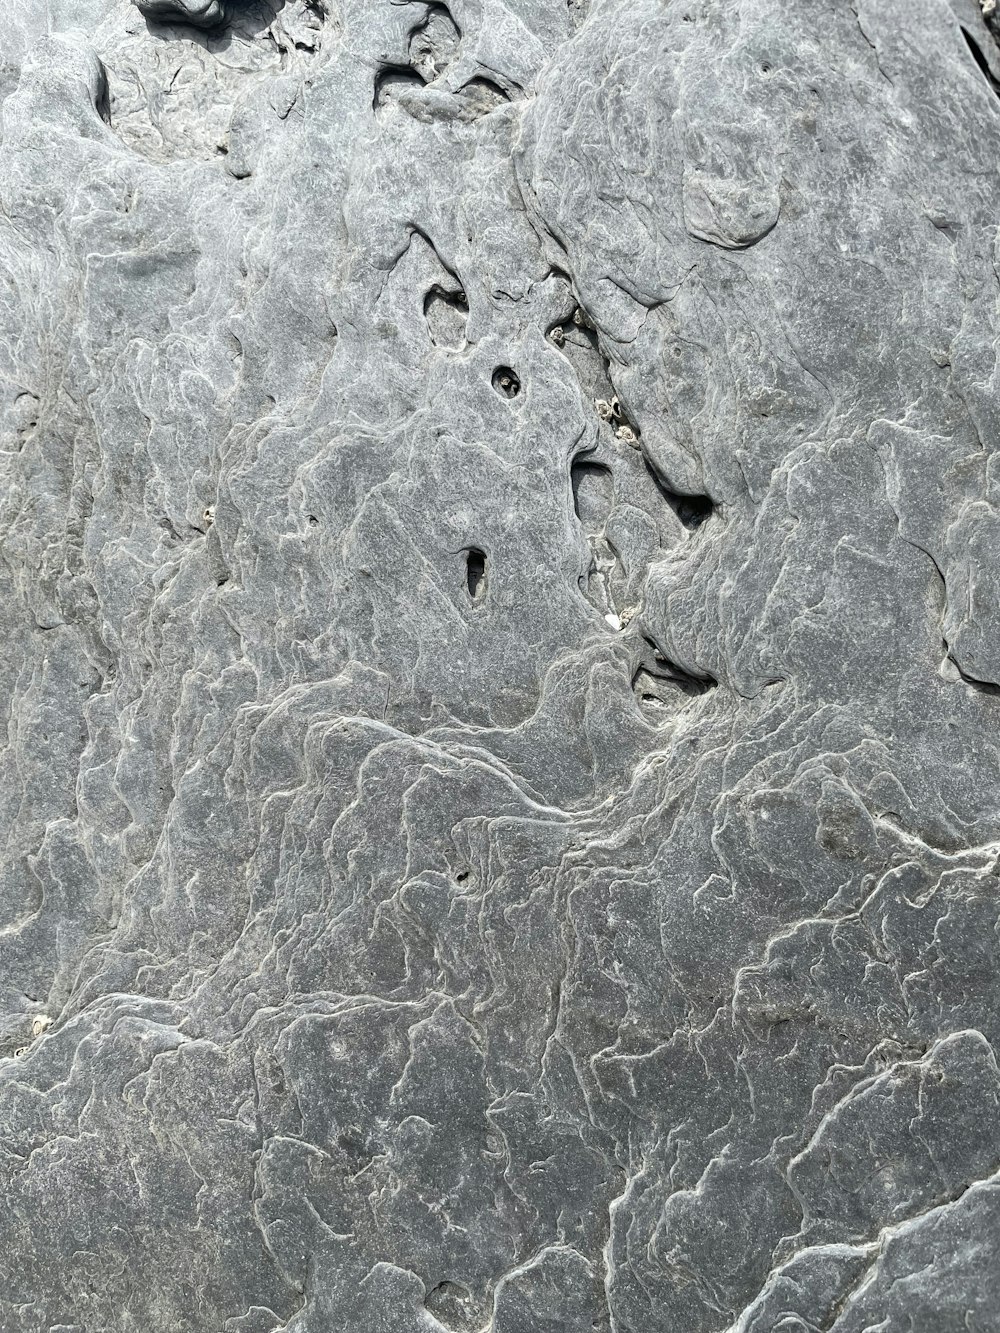 water droplets on gray concrete surface